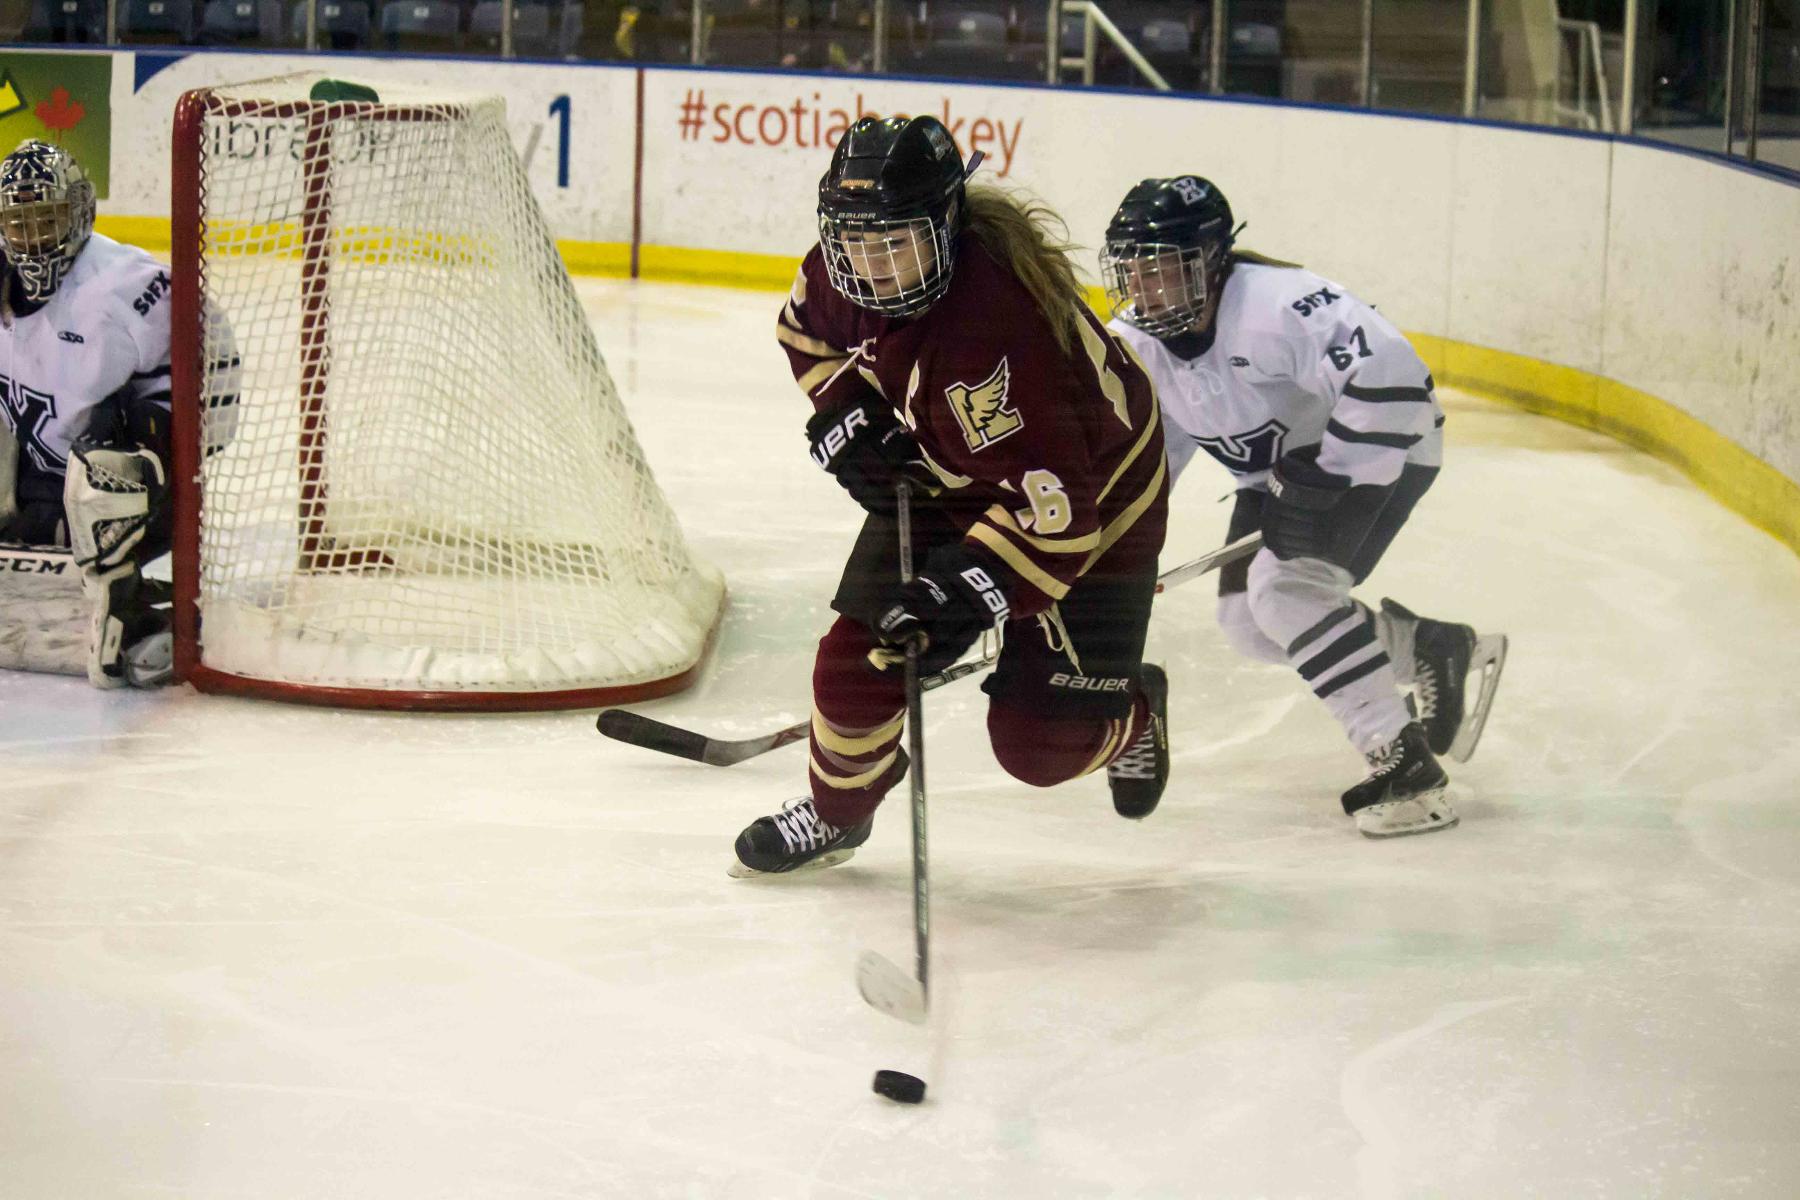 Mounties season ends with 5-2 loss to StFX